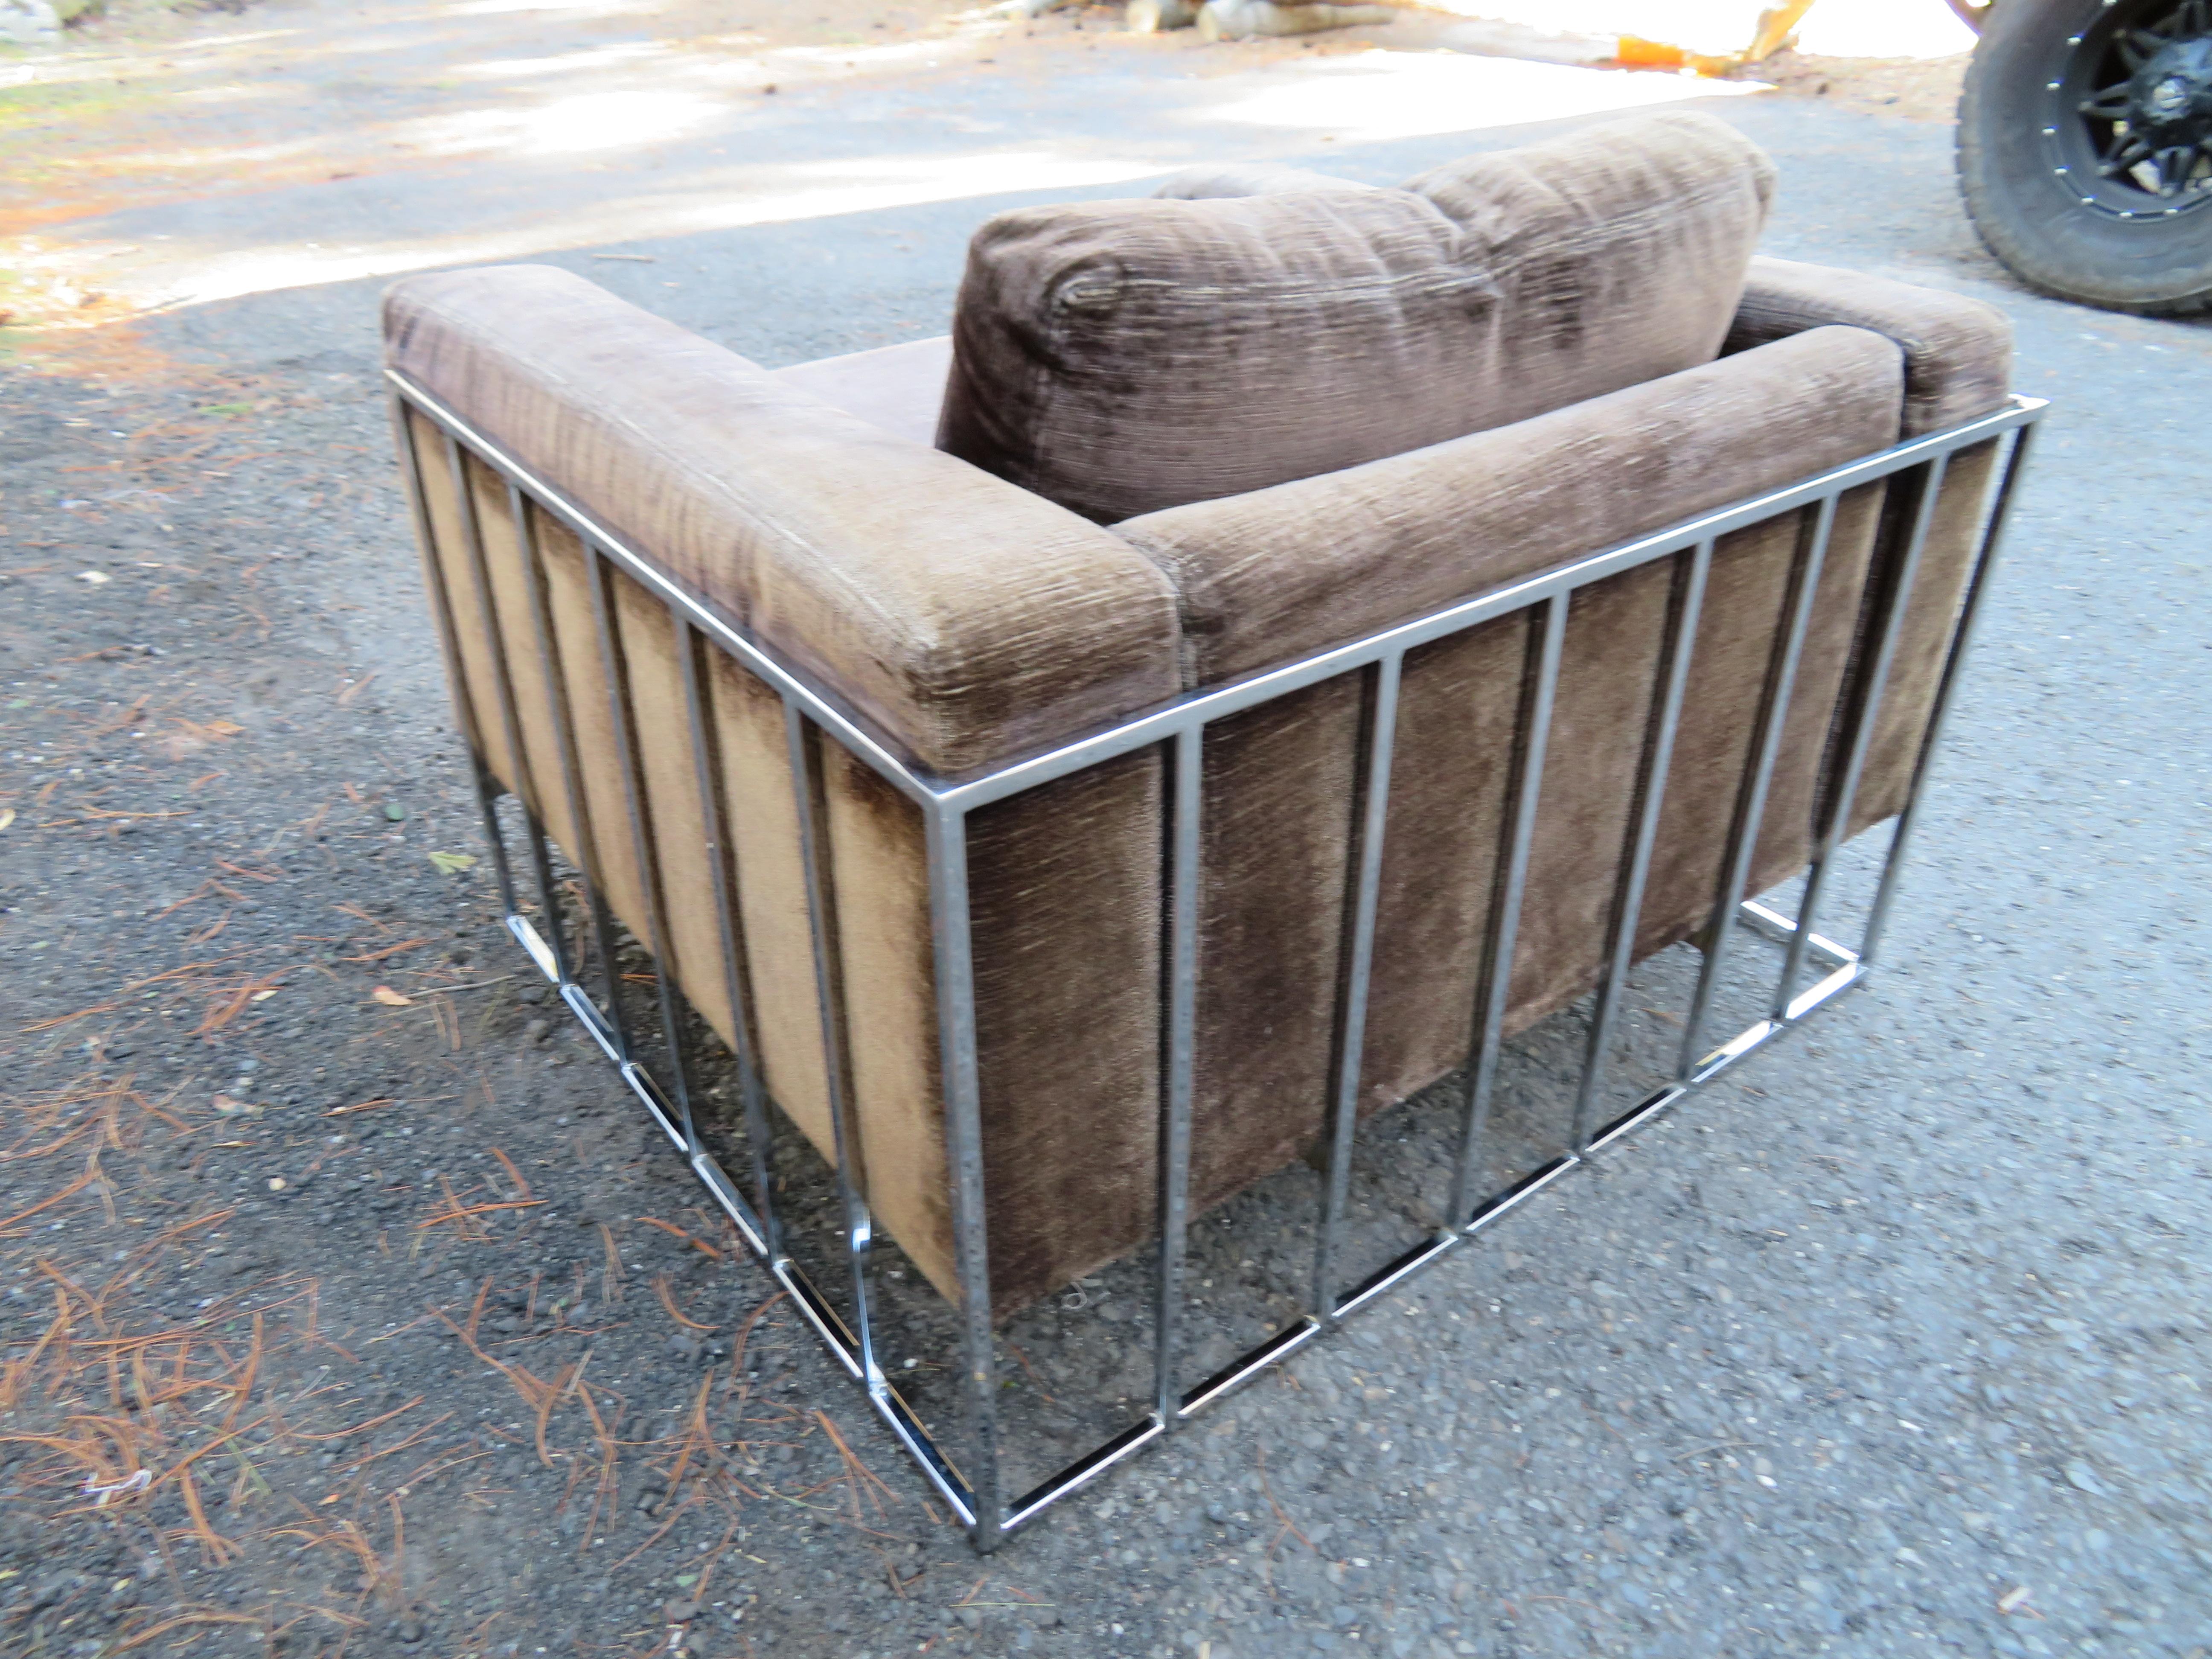 Unusual Milo Baughman Chrome Cube Cage Lounge Chair Mid-Century Modern In Good Condition For Sale In Pemberton, NJ